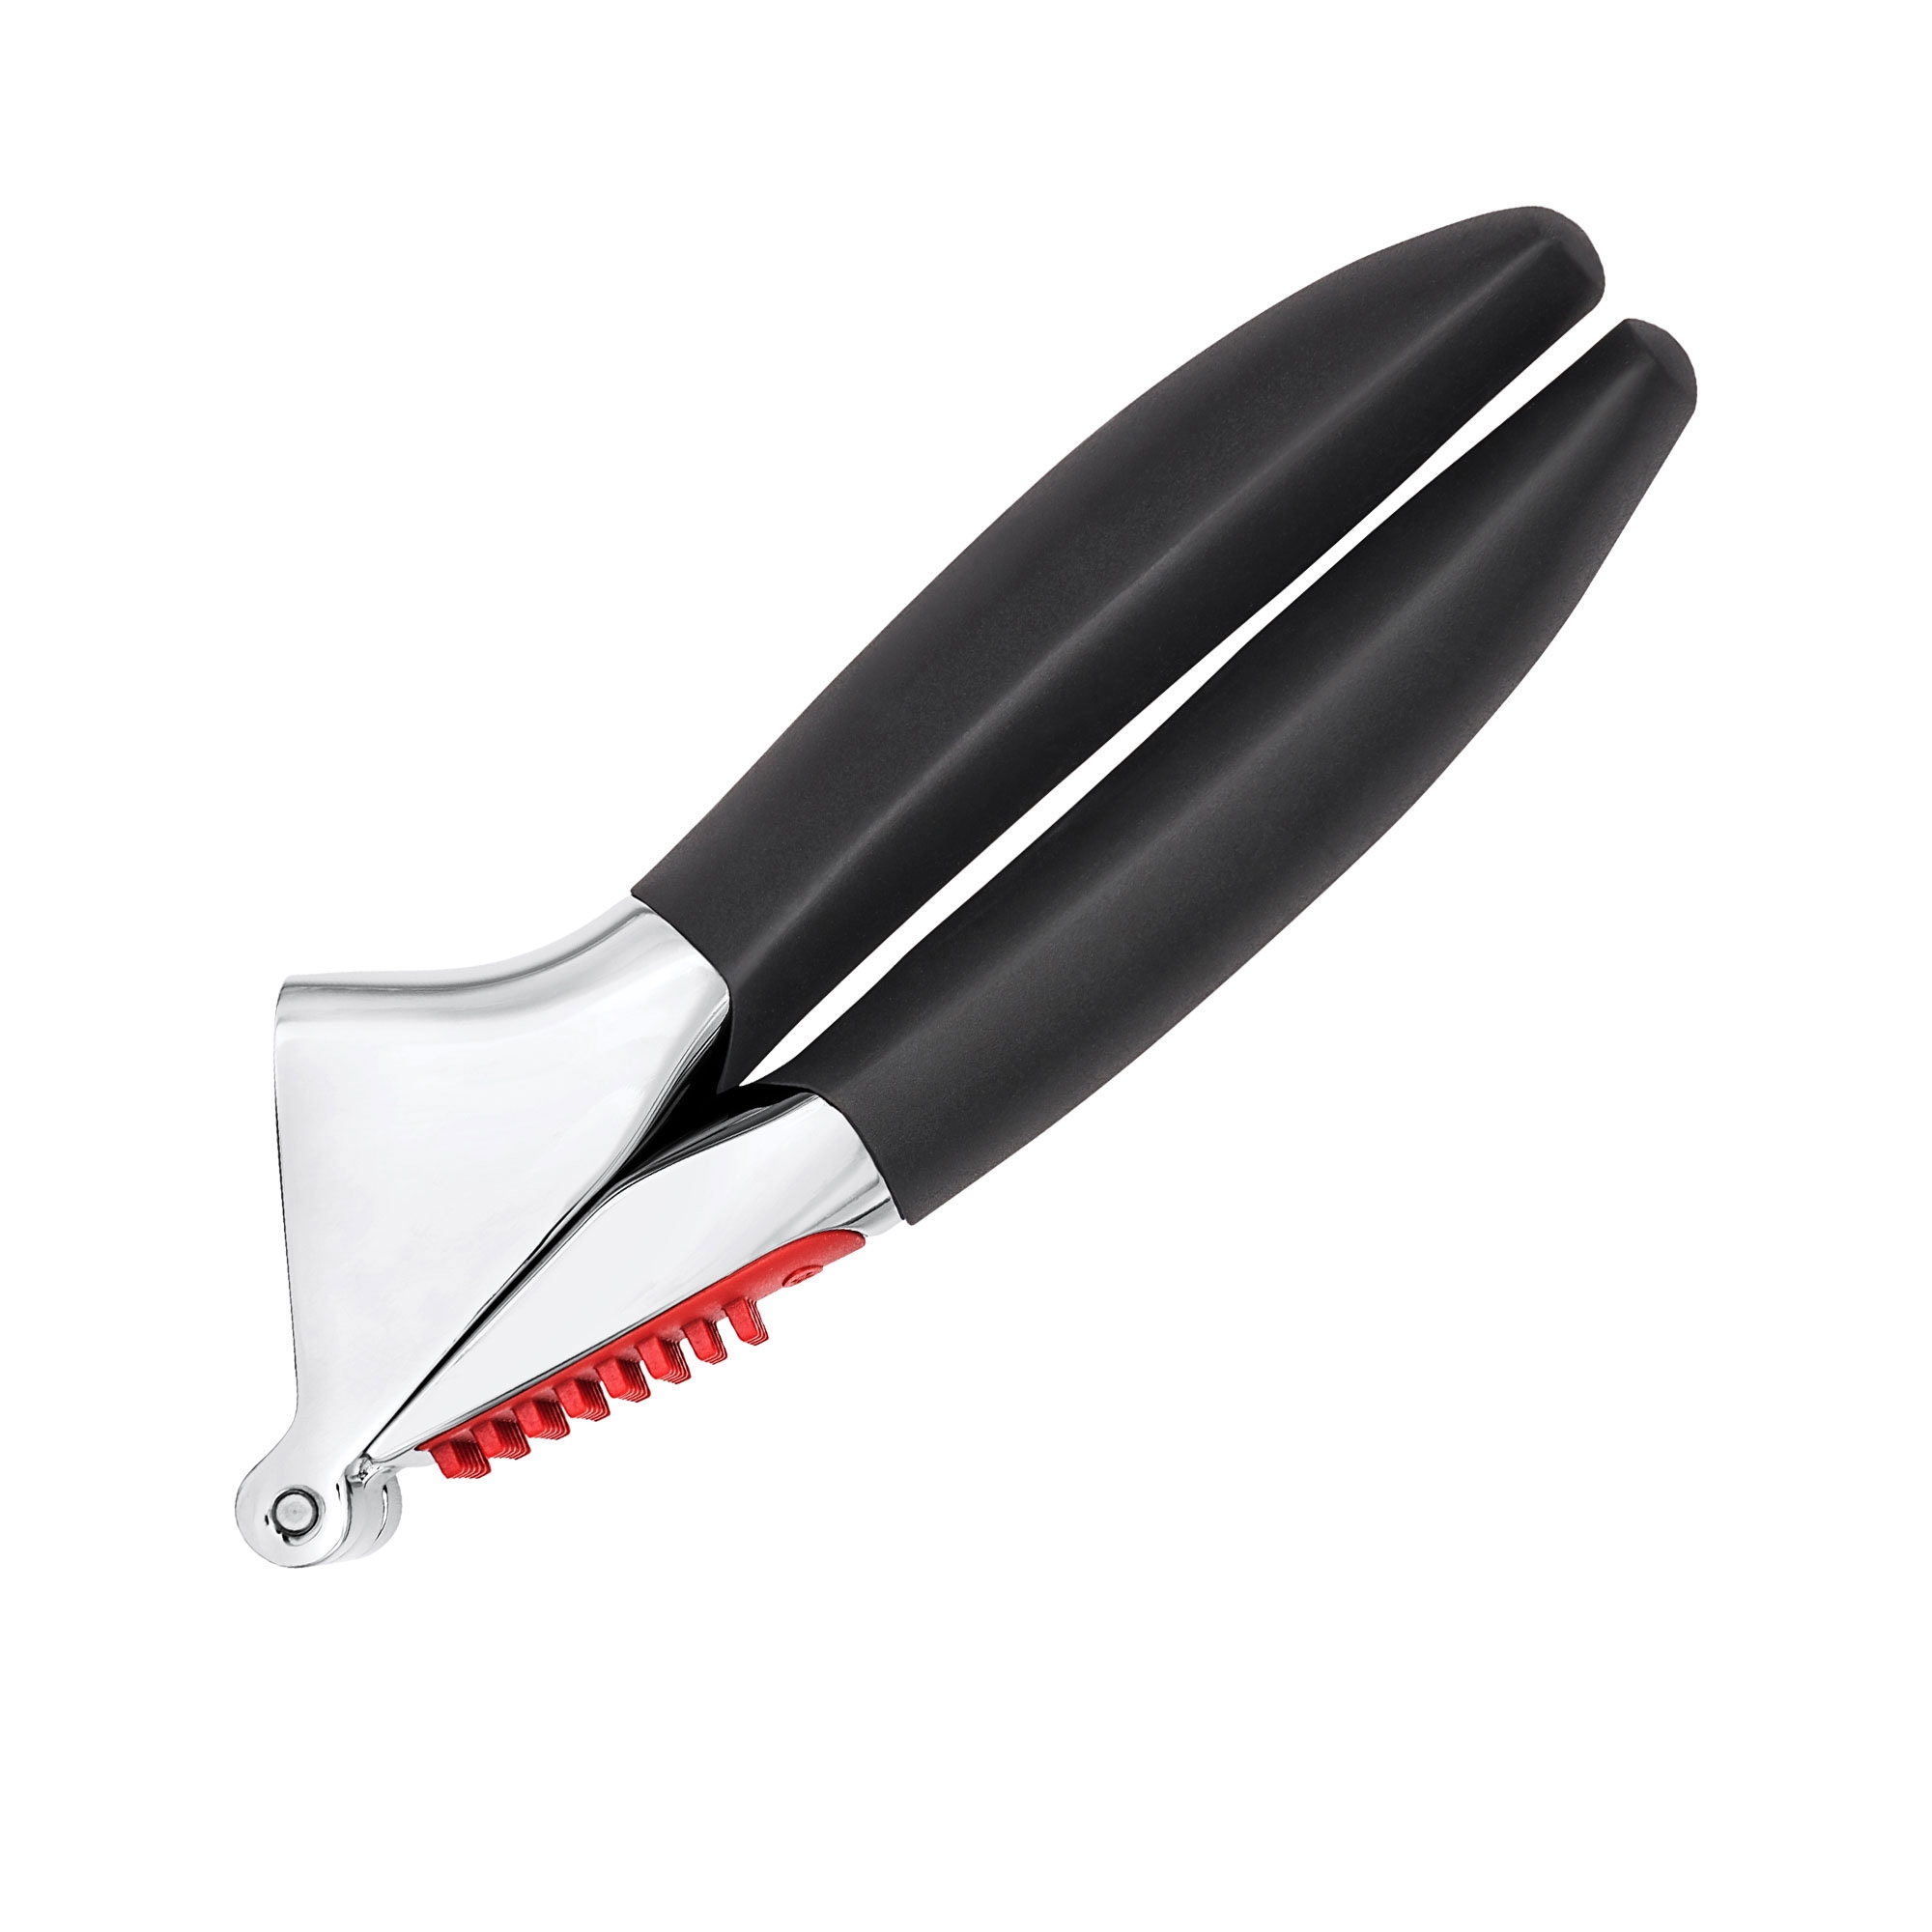 OXO Good Grips Garlic Press with Built In Cleaner Image 1